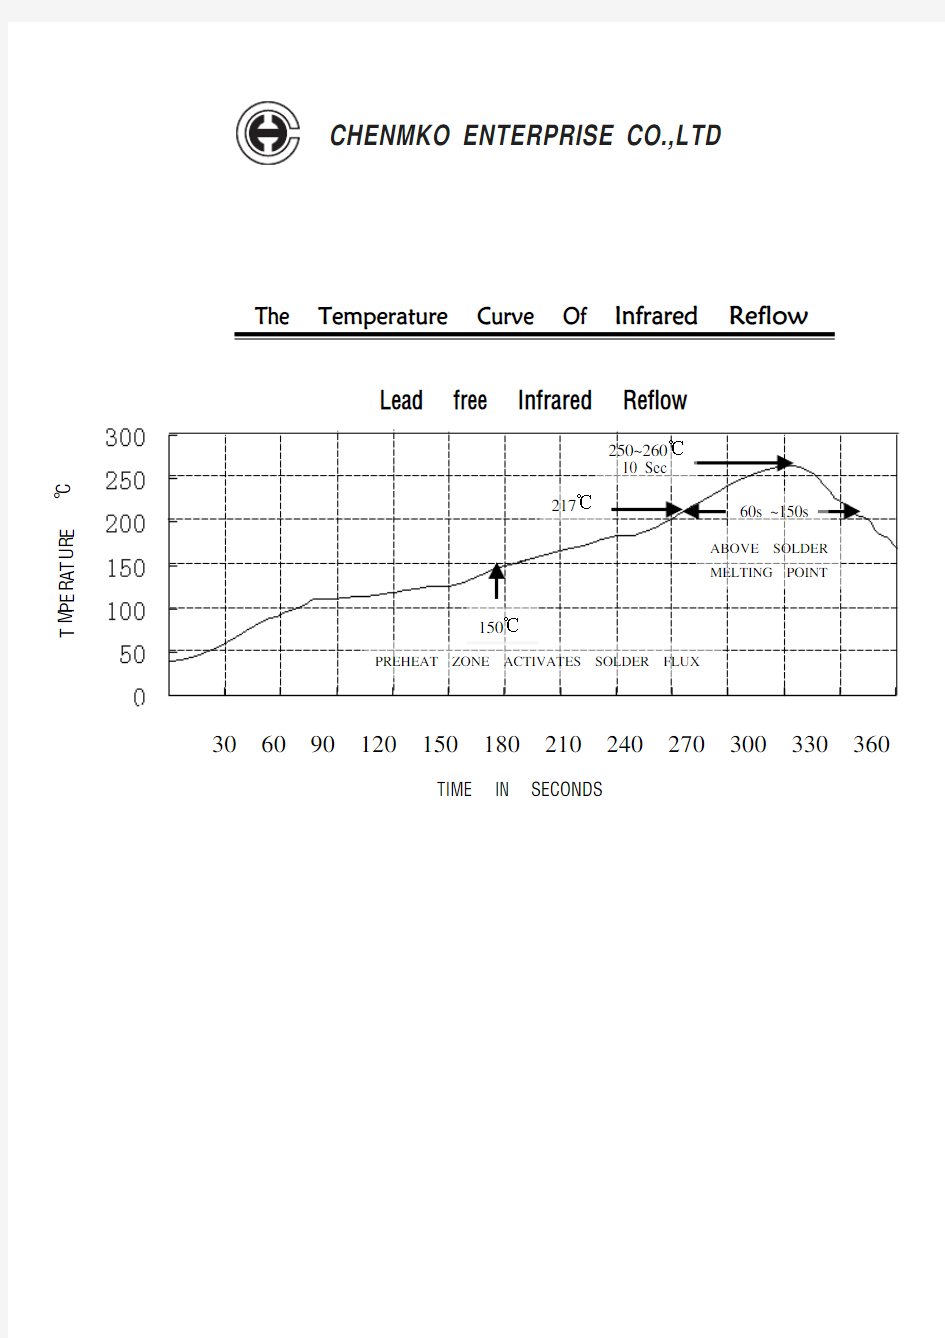 The Temperature Curve Of Infrared Reflow